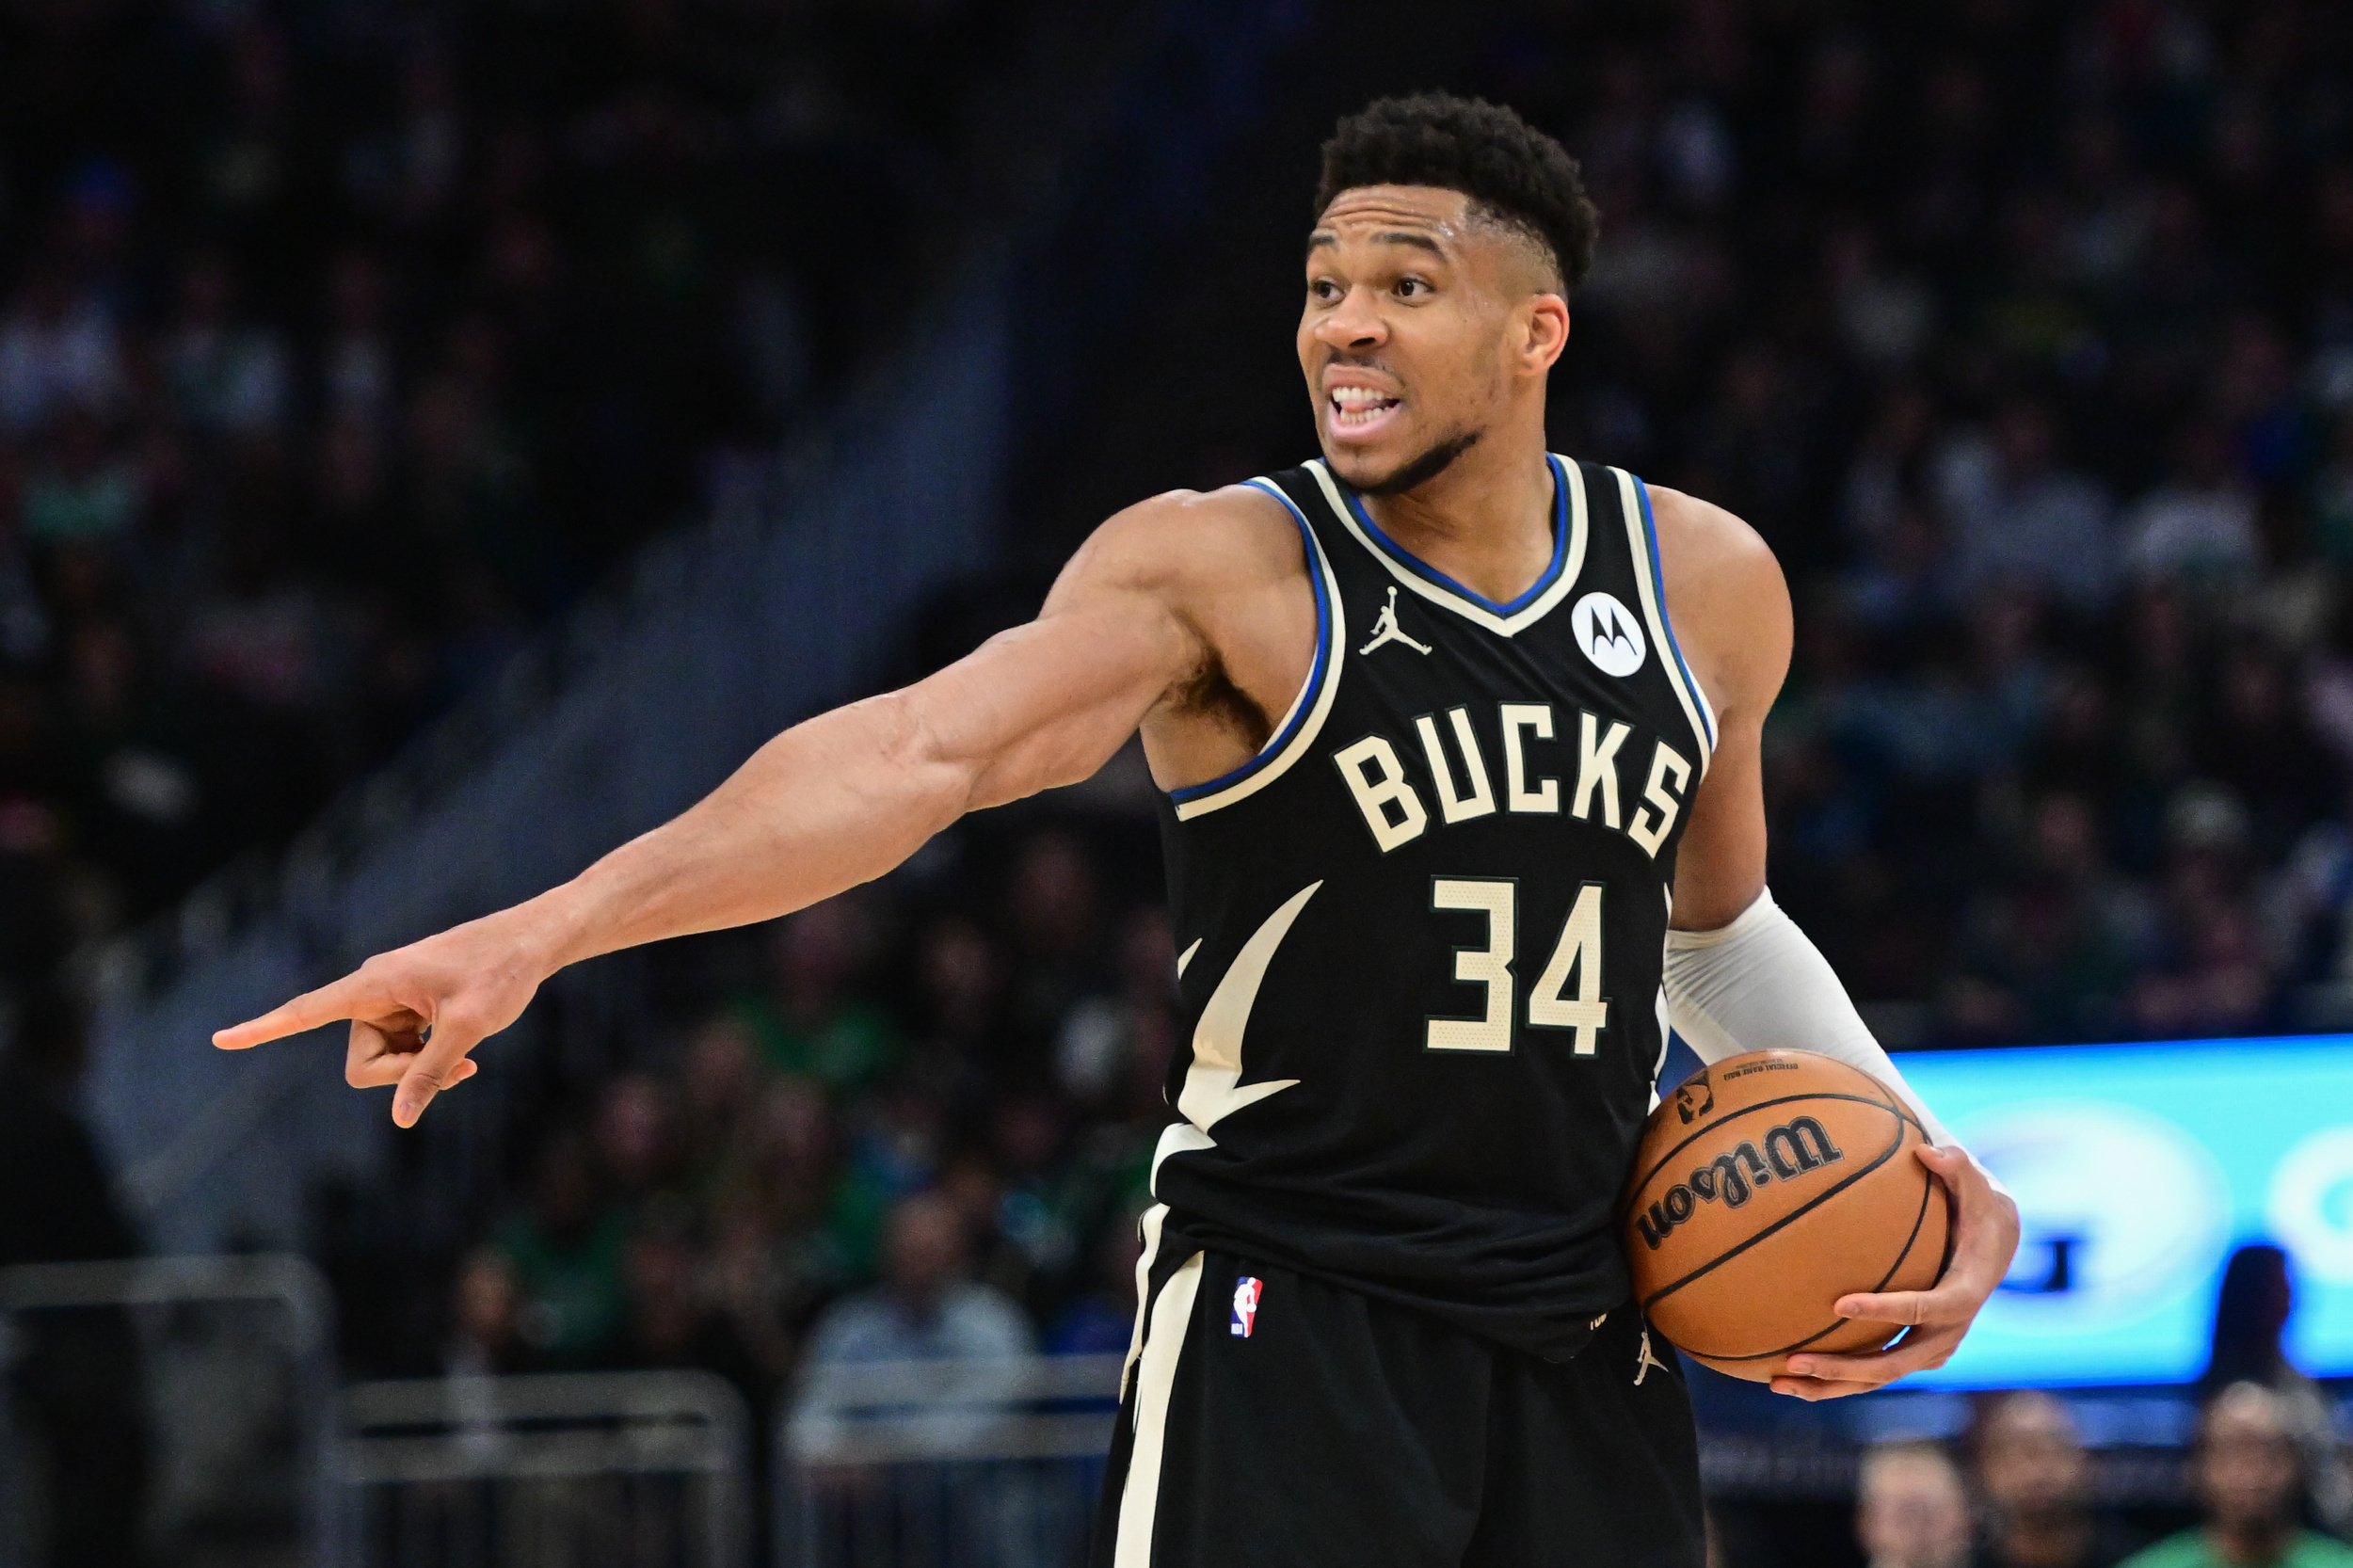 the bucks' ability to keep giannis antetokounmpo rests on this playoff run